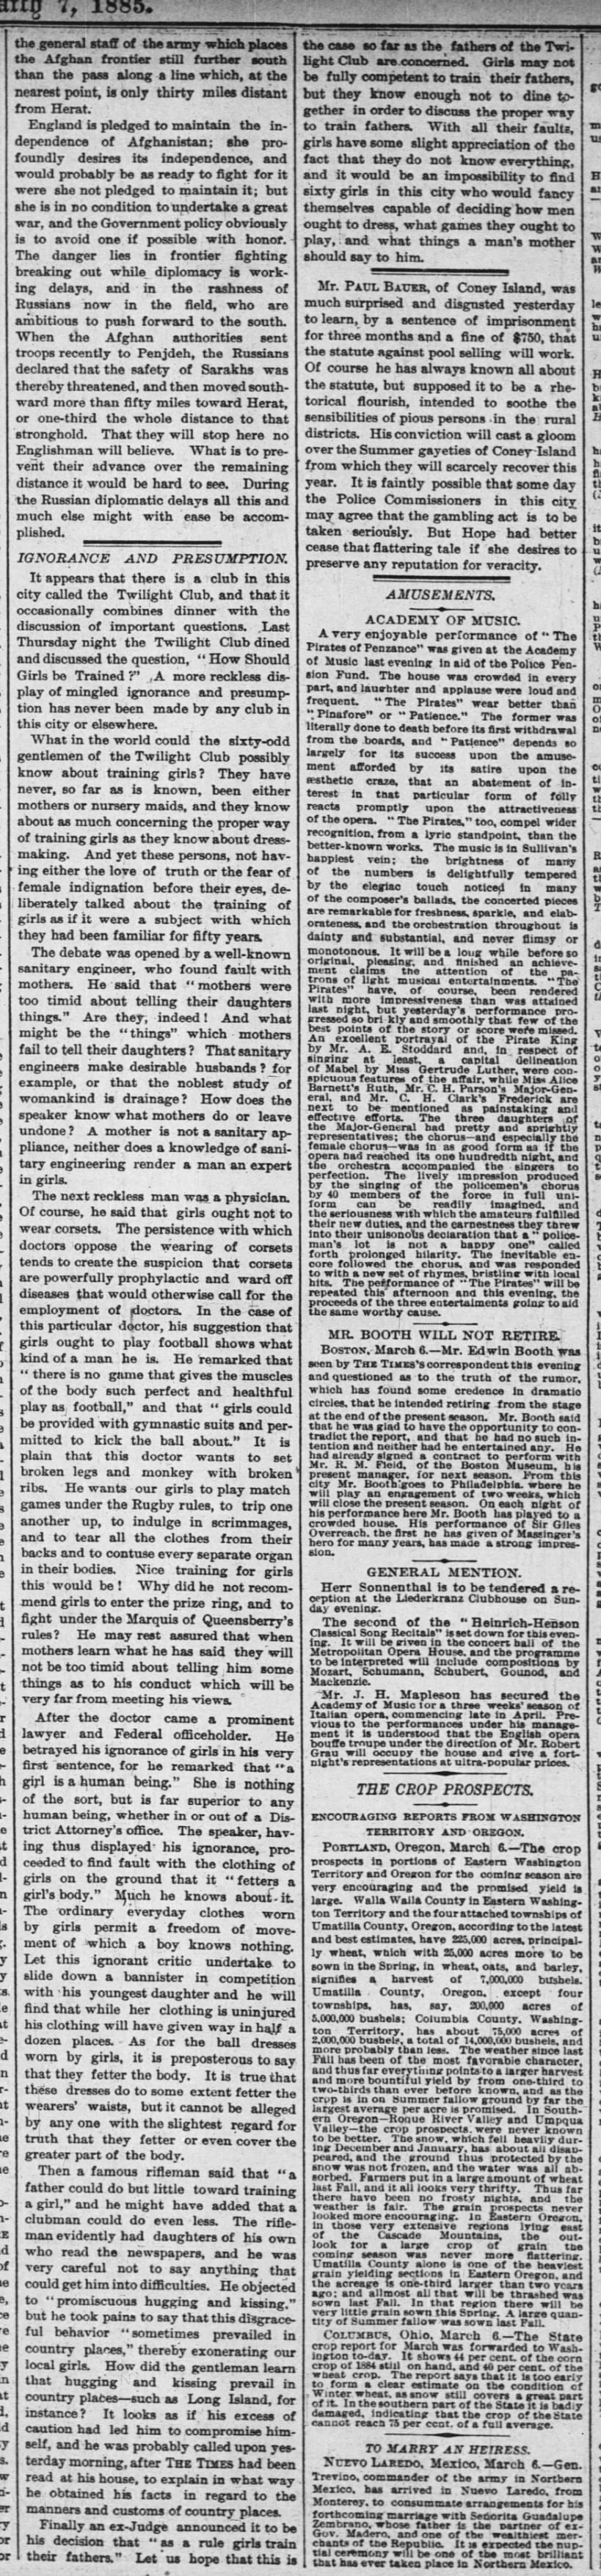 The New York Times
(New York, New York)
7 March 1885  Page 4